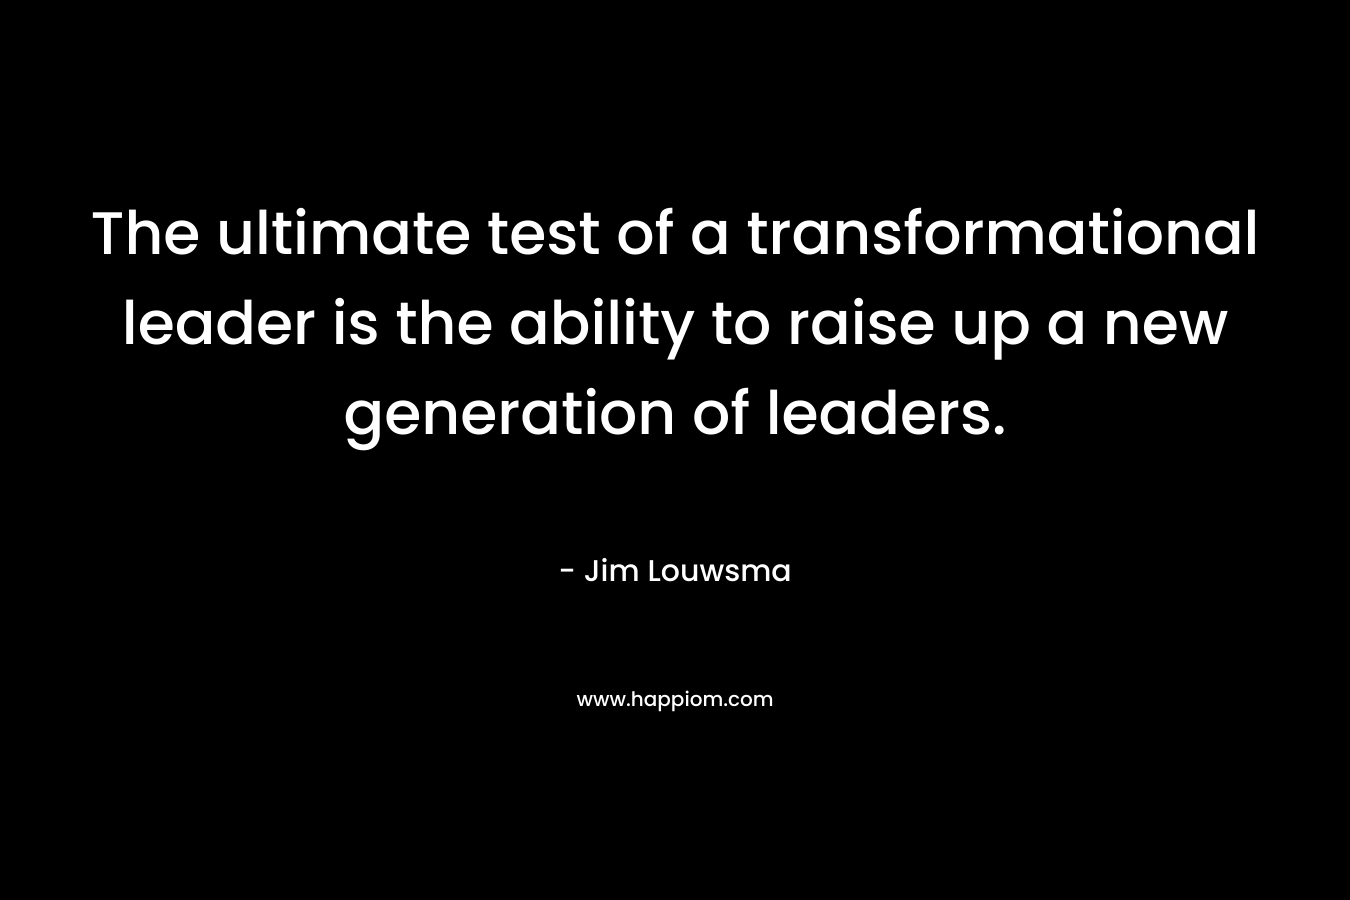 The ultimate test of a transformational leader is the ability to raise up a new generation of leaders. – Jim Louwsma